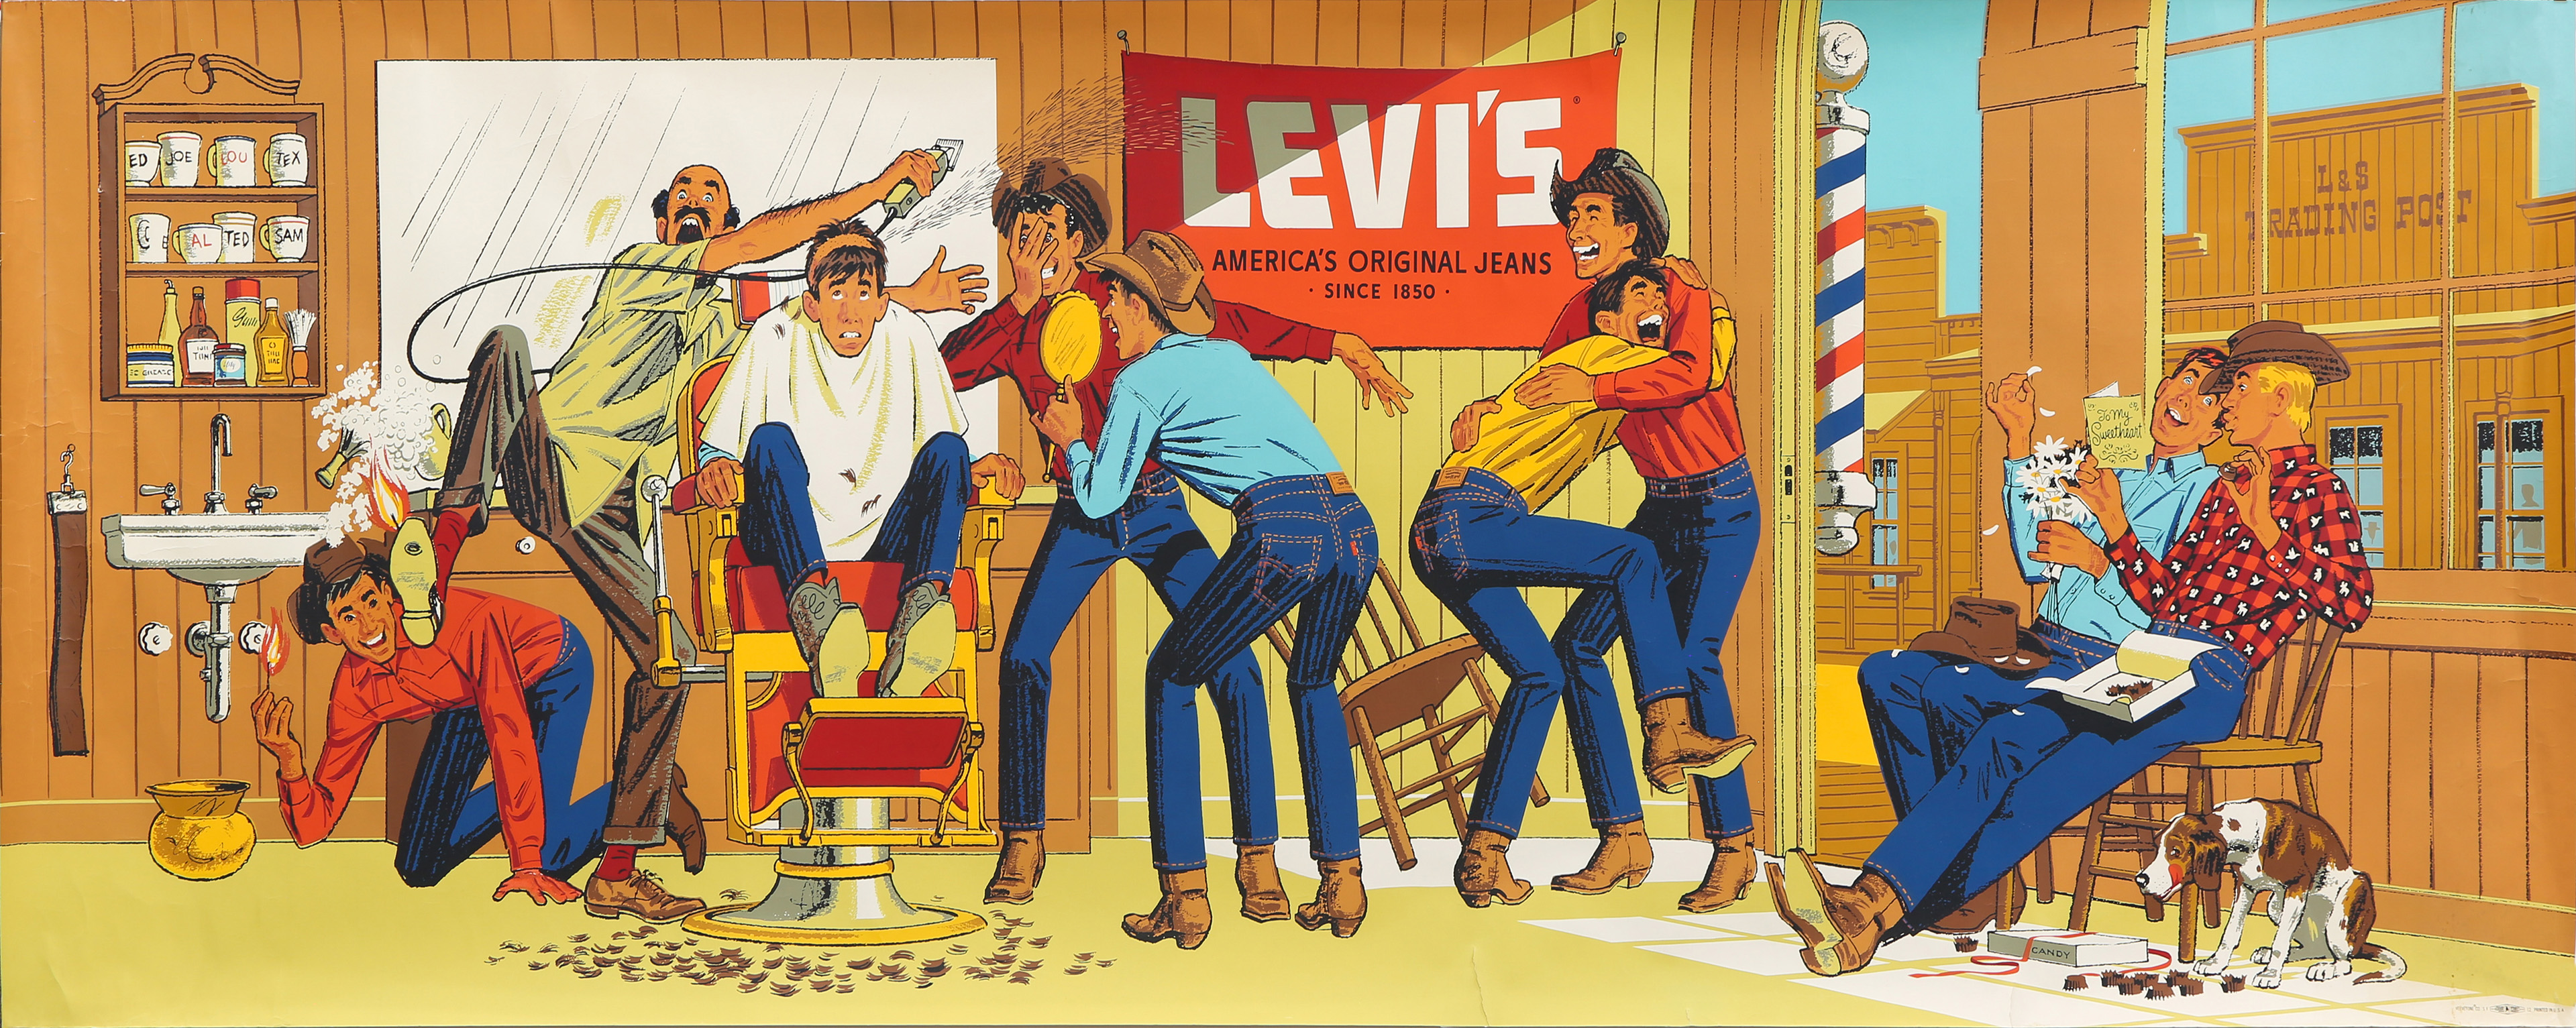 LEVI STRAUSS AND CO ADVERTISING 3a4d06